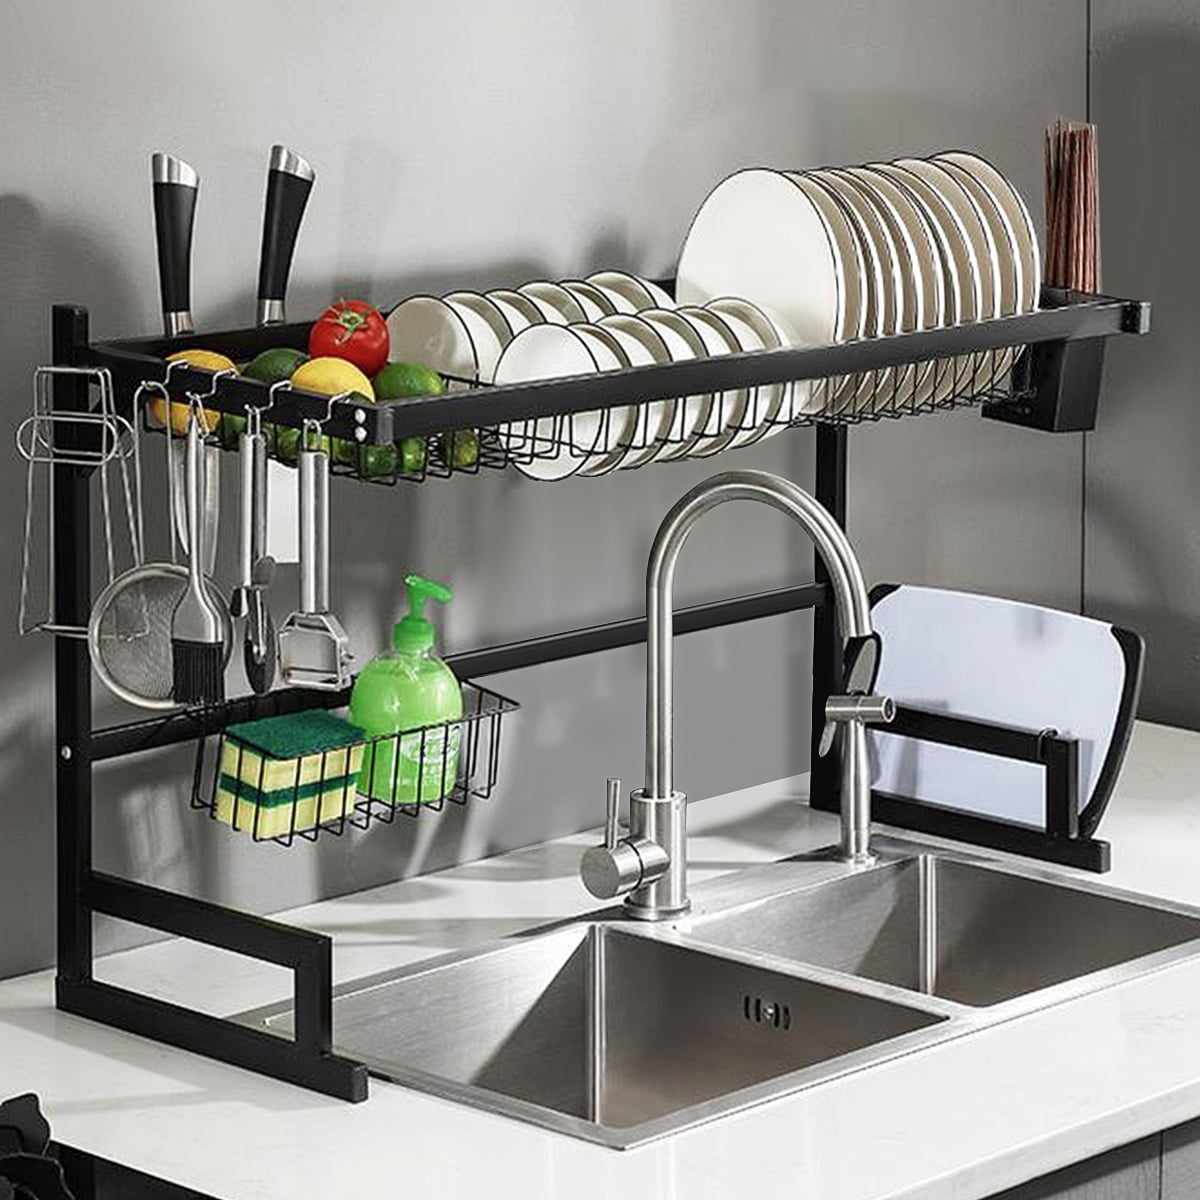 Stainless Steel 2 Tier Dish Drying Rack - Over Sink, Drainer Shelf Stainless Steel Sink Drain Rack